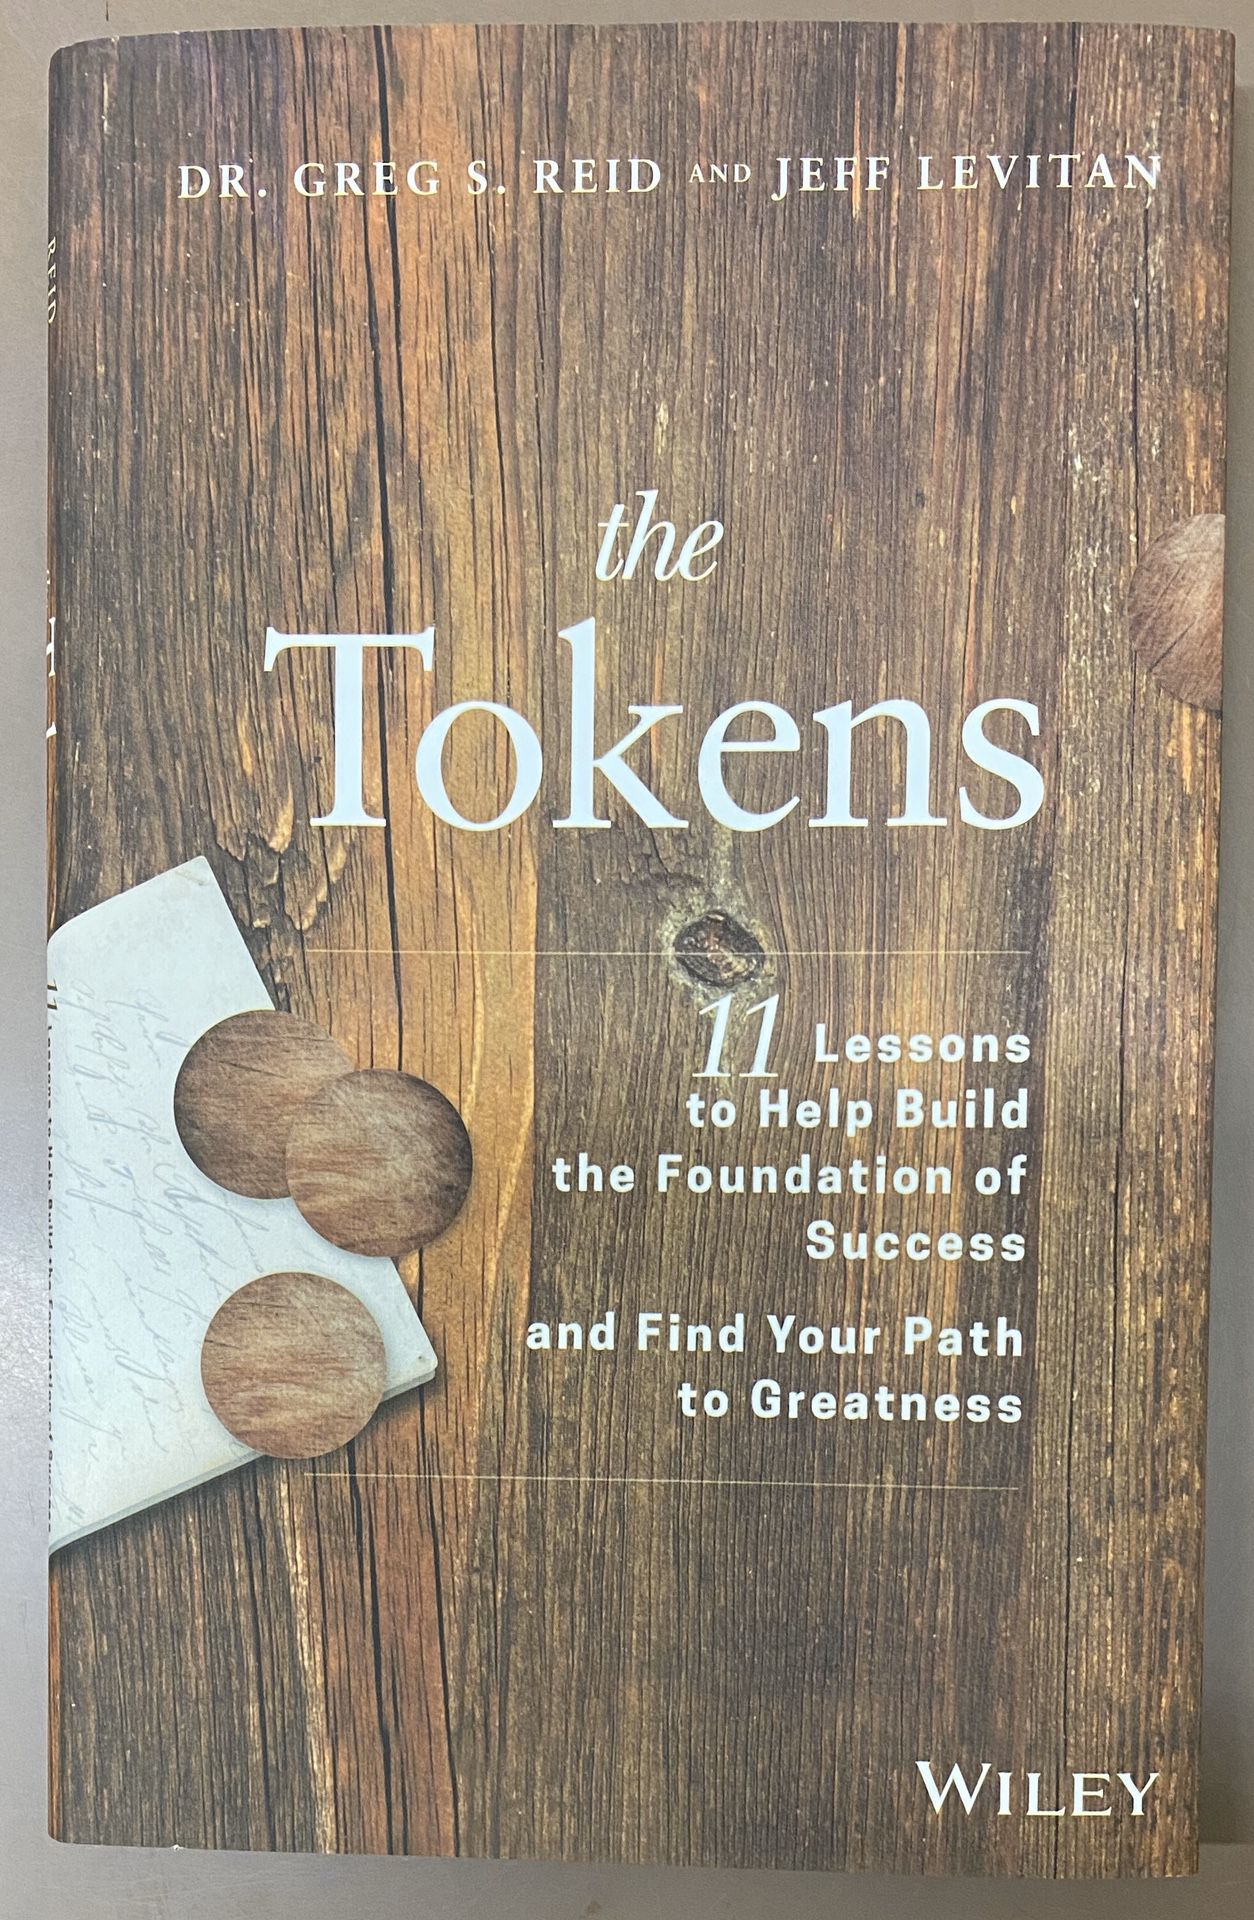 The tokens